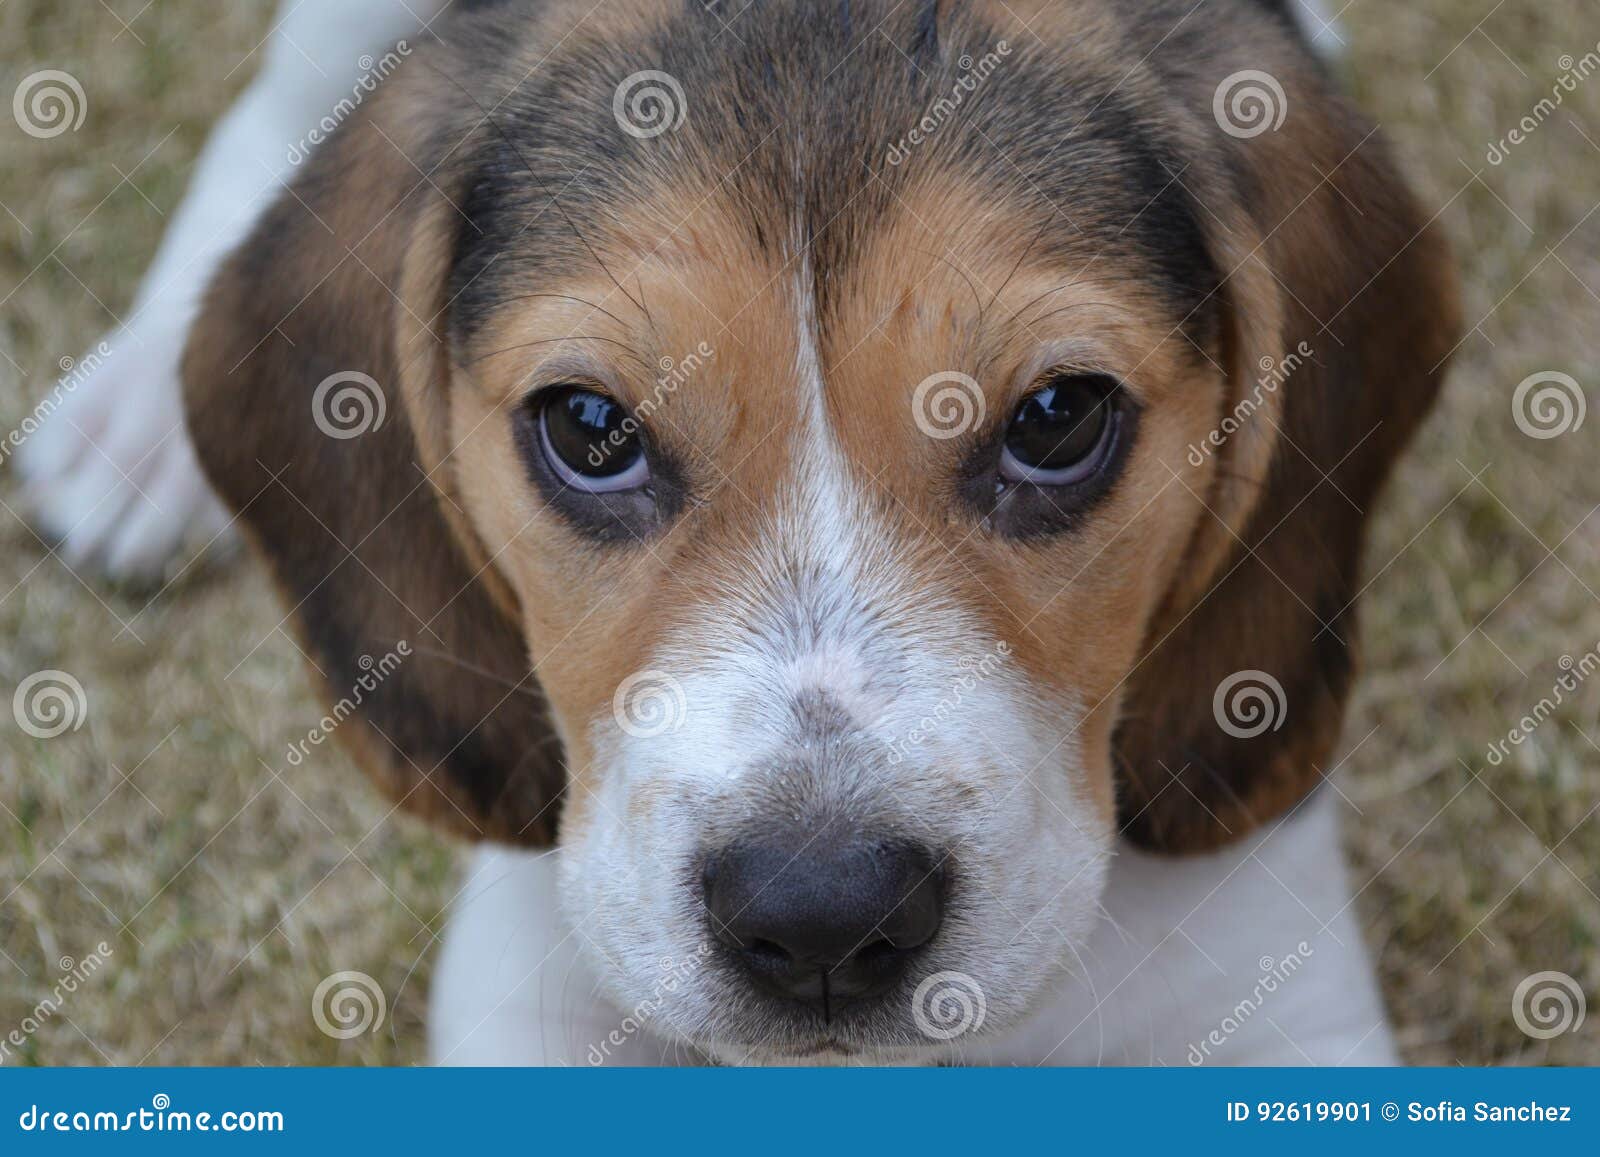 Dog Stock Image Image Of Harrier Snout Whiskers Beagle 92619901